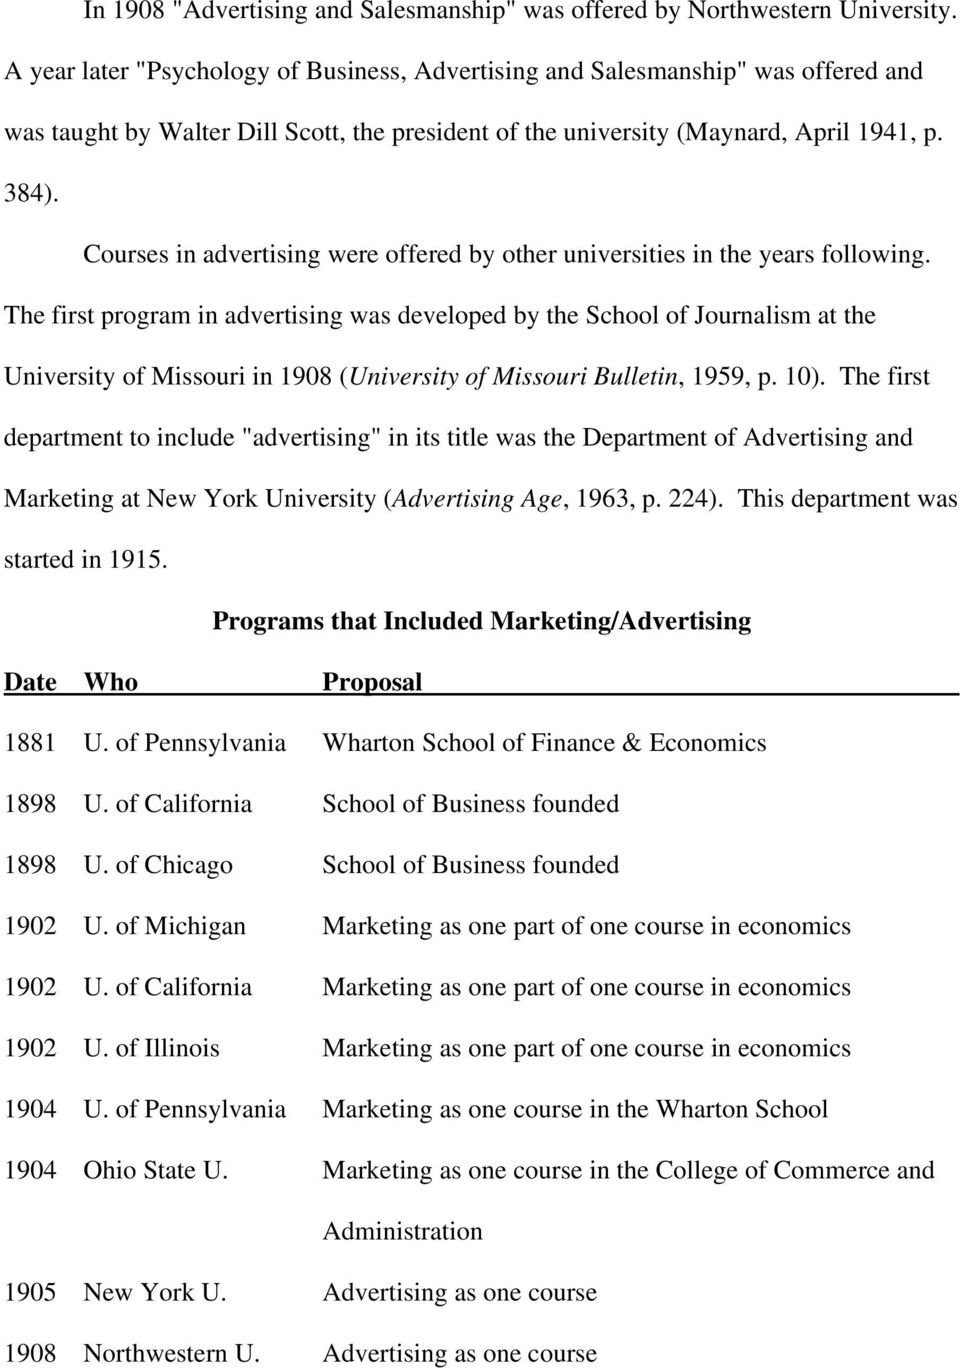 Courses in advertising were offered by other universities in the years following.